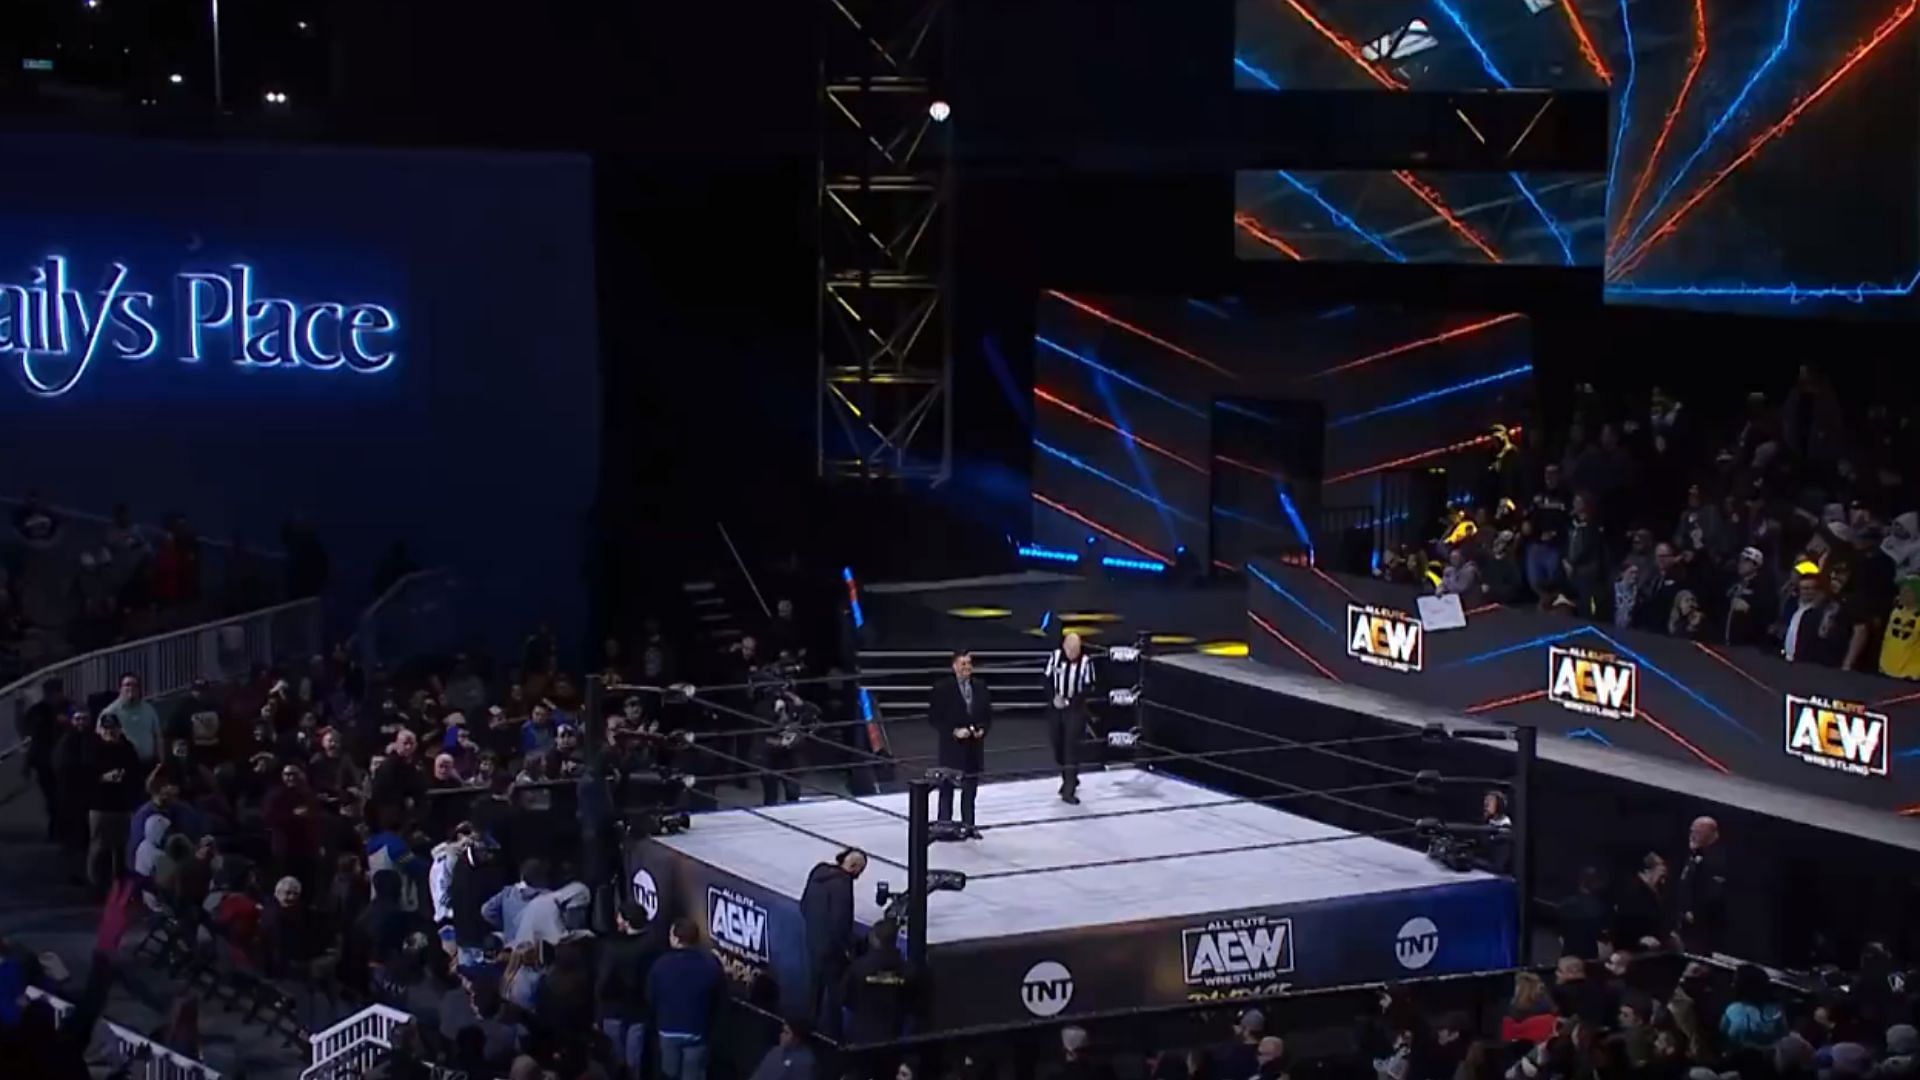 AEW has been under some criticism recently over viewership and ticket sales